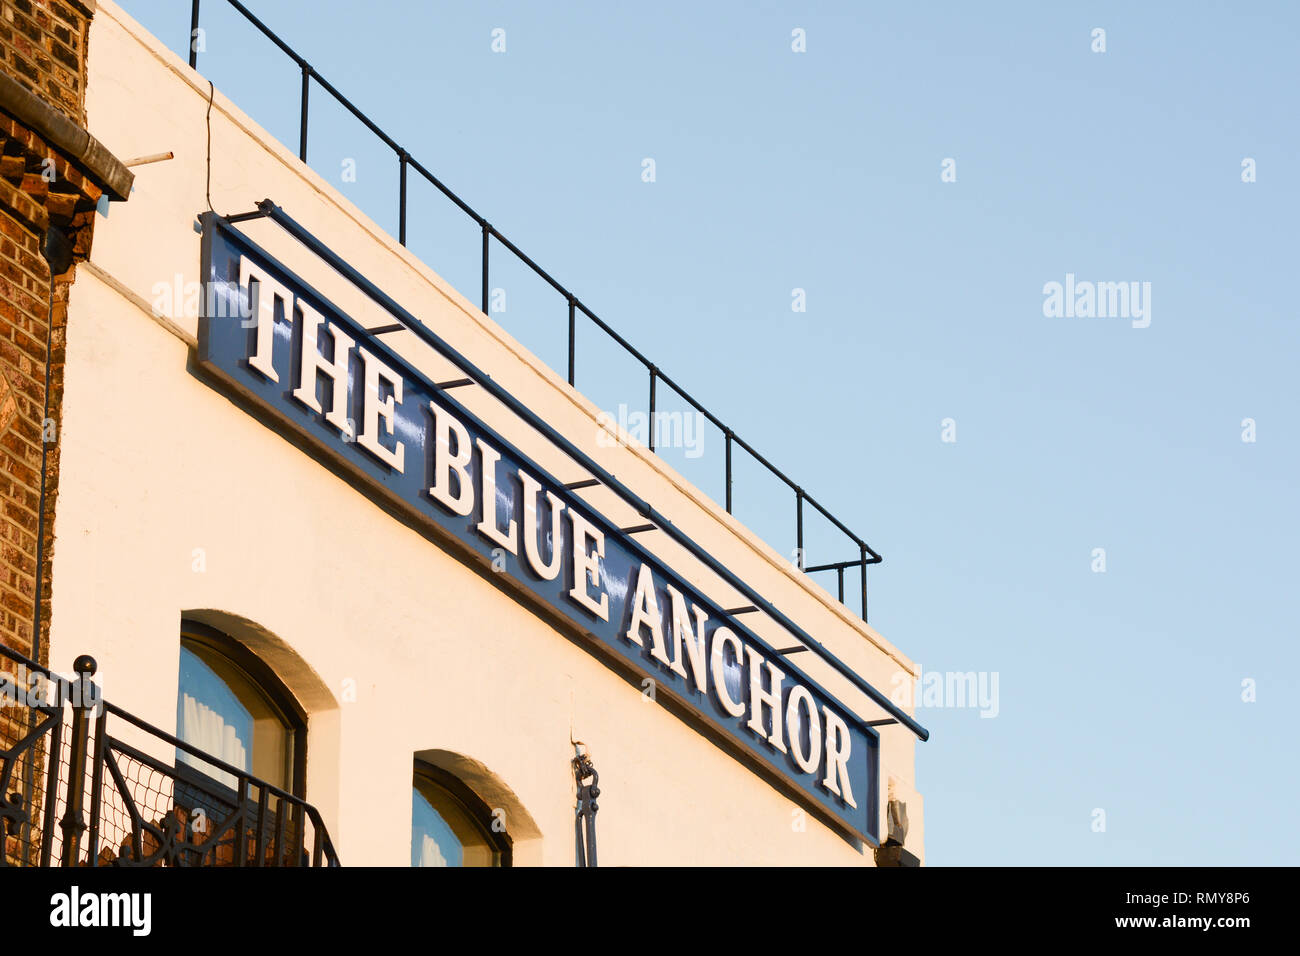 The Blue Anchor public House on the Mall, Hammersmith, Londres, W6, Royaume-Uni Banque D'Images